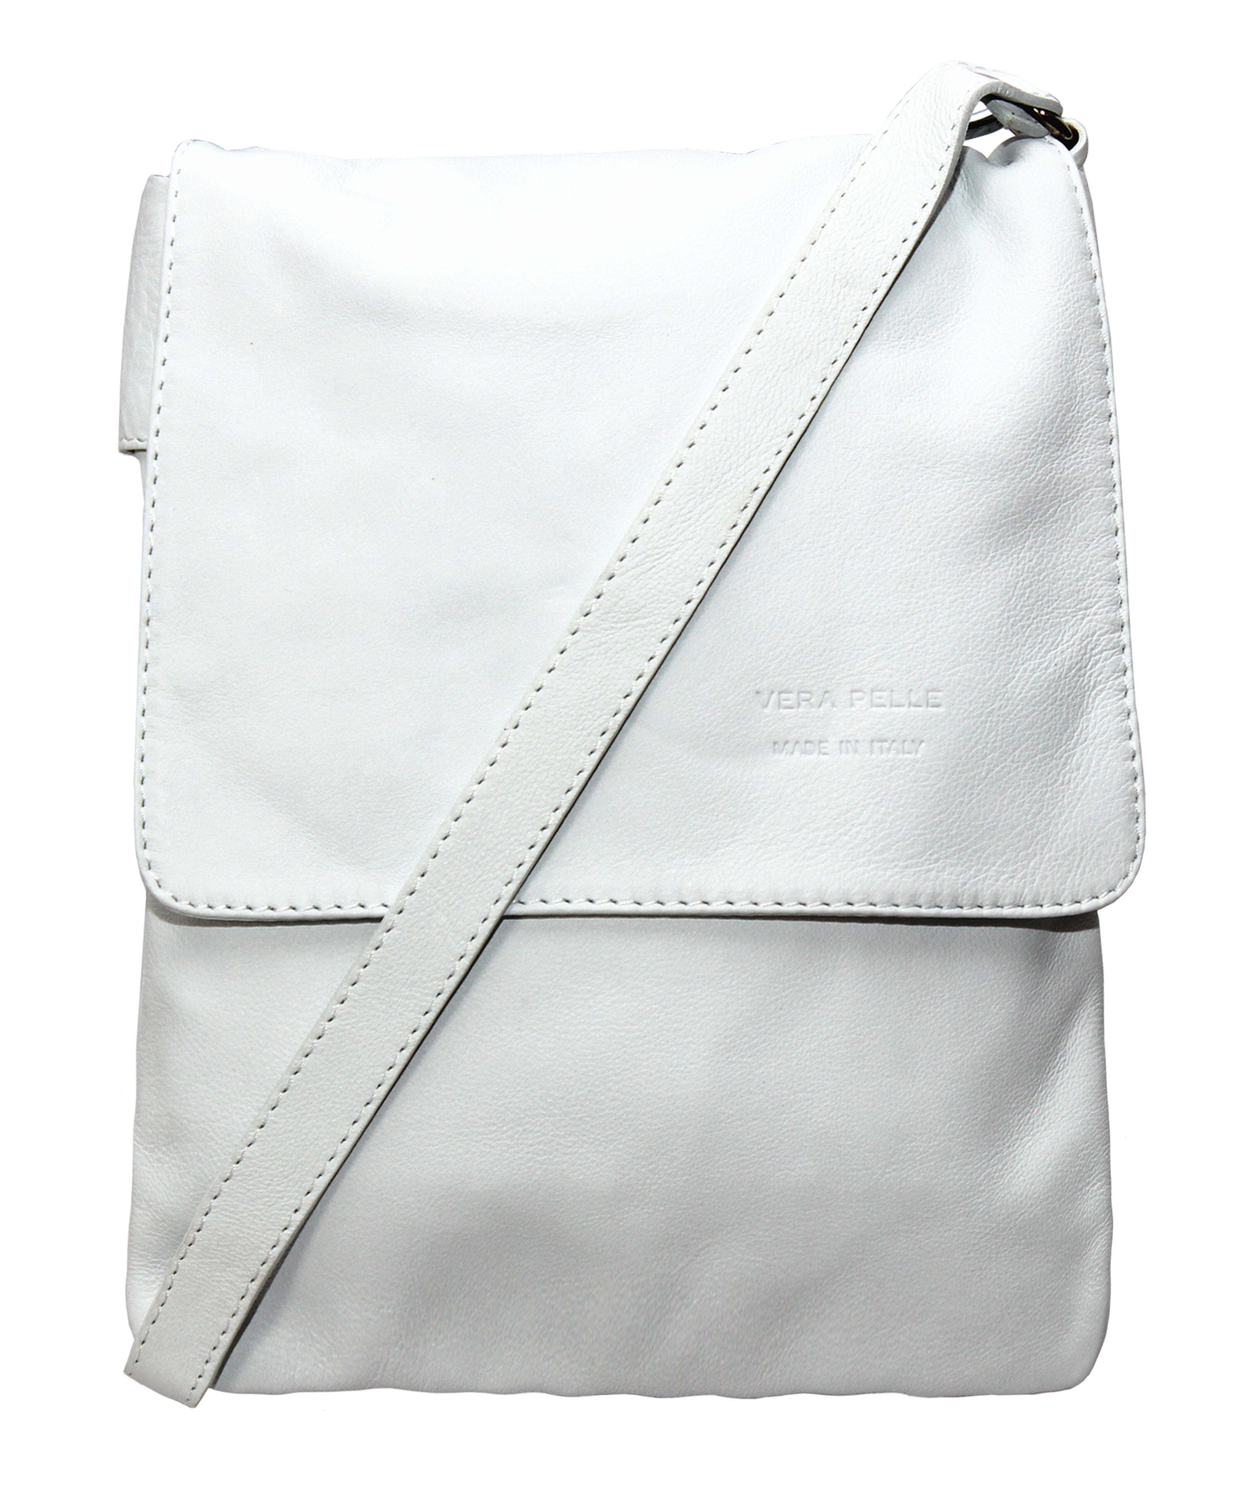 White Small Soft Leather Messenger Bag 